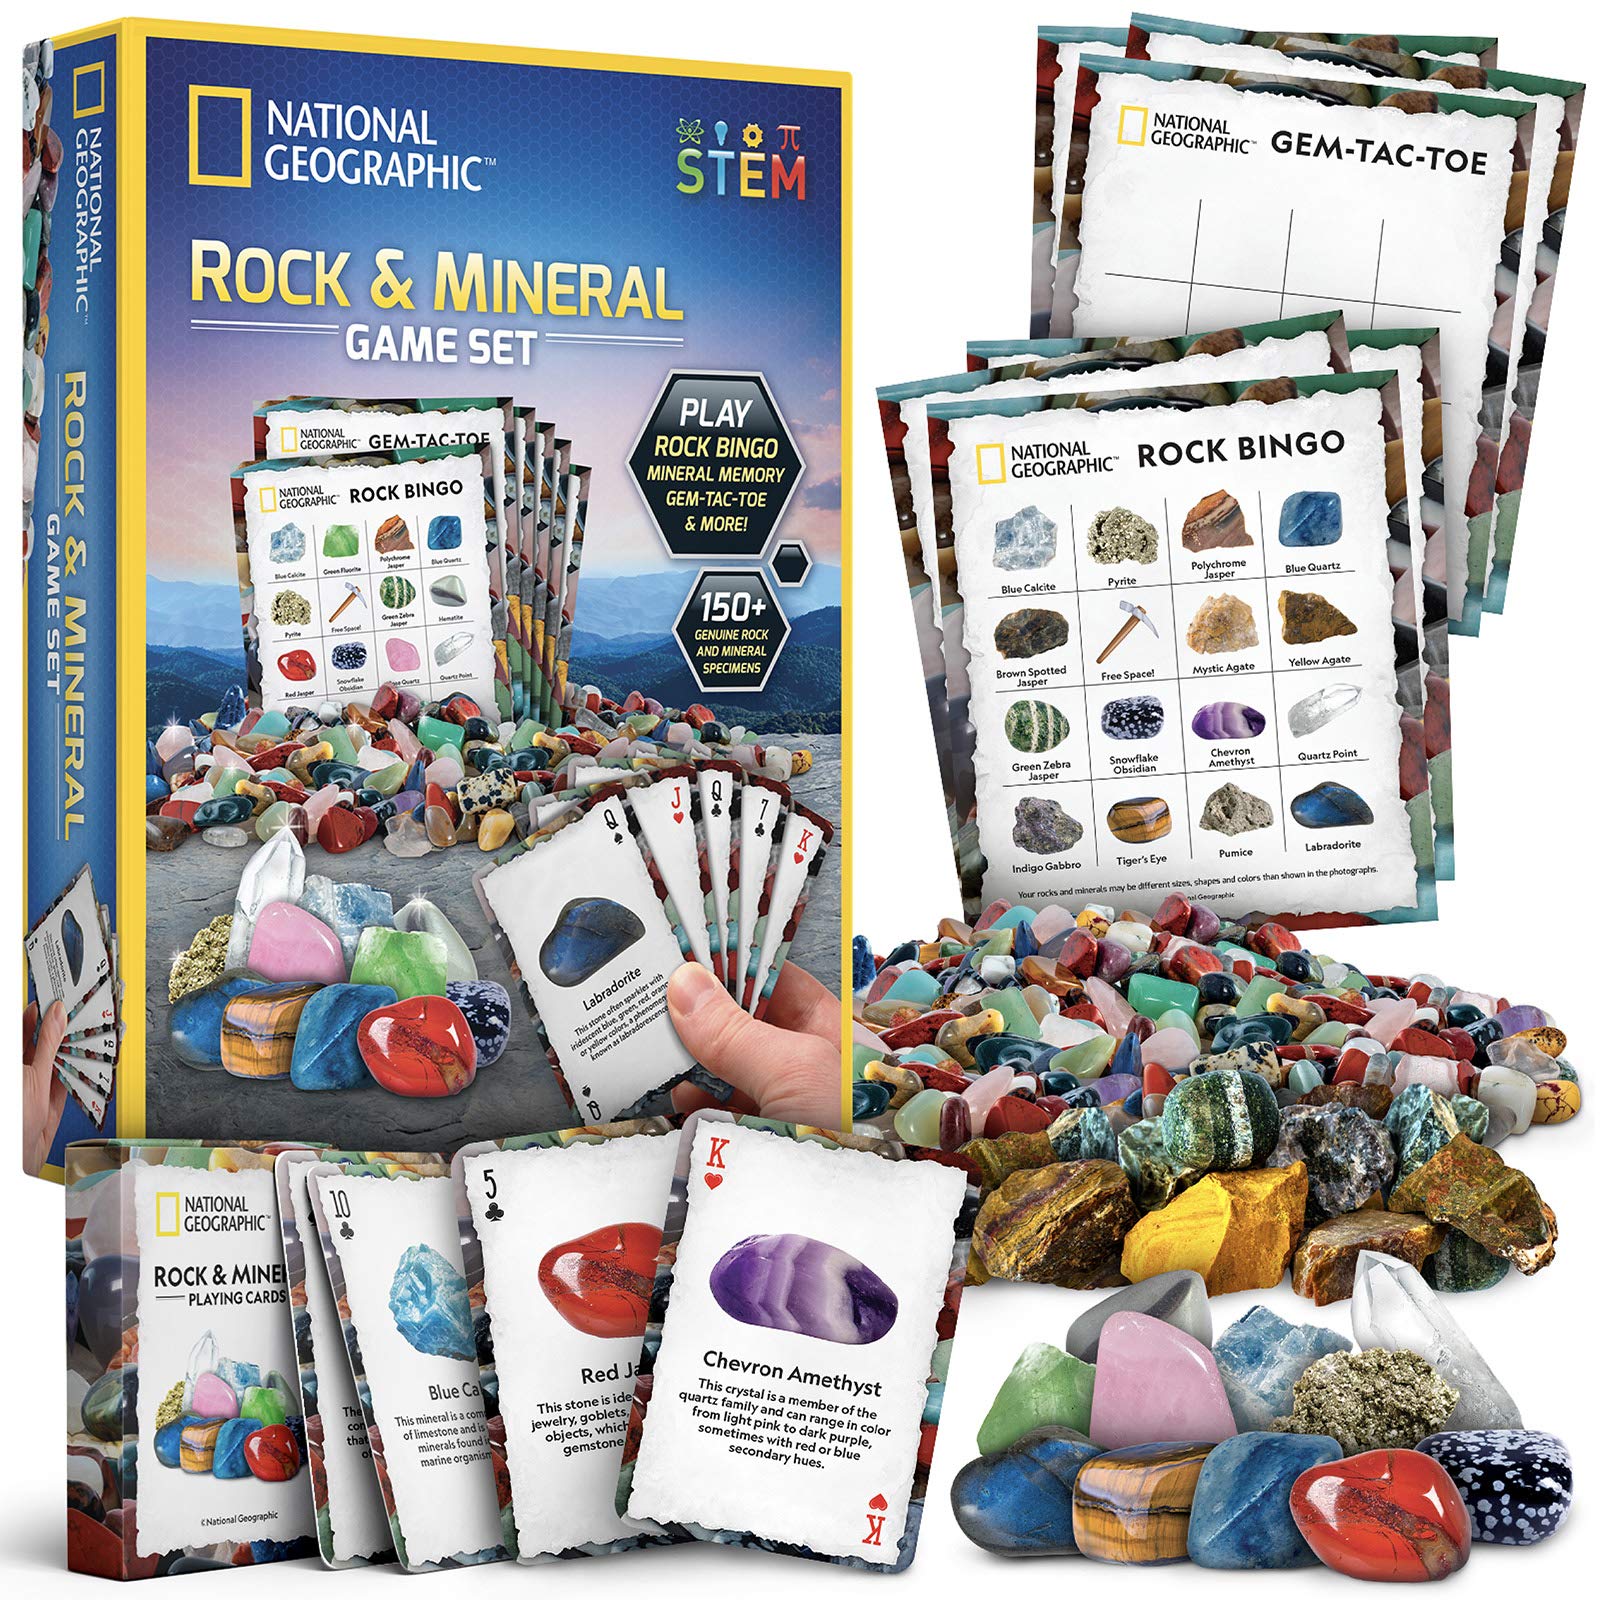 NATIONAL GEOGRAPHIC Rock Bingo Game - Play Rock Bingo, Mineral Memory, Gemstone Trivia, & Card Games, Collection Includes Over 150 Rocks and Minerals, Educational STEM Toy for Kids (Amazon Exclusive)